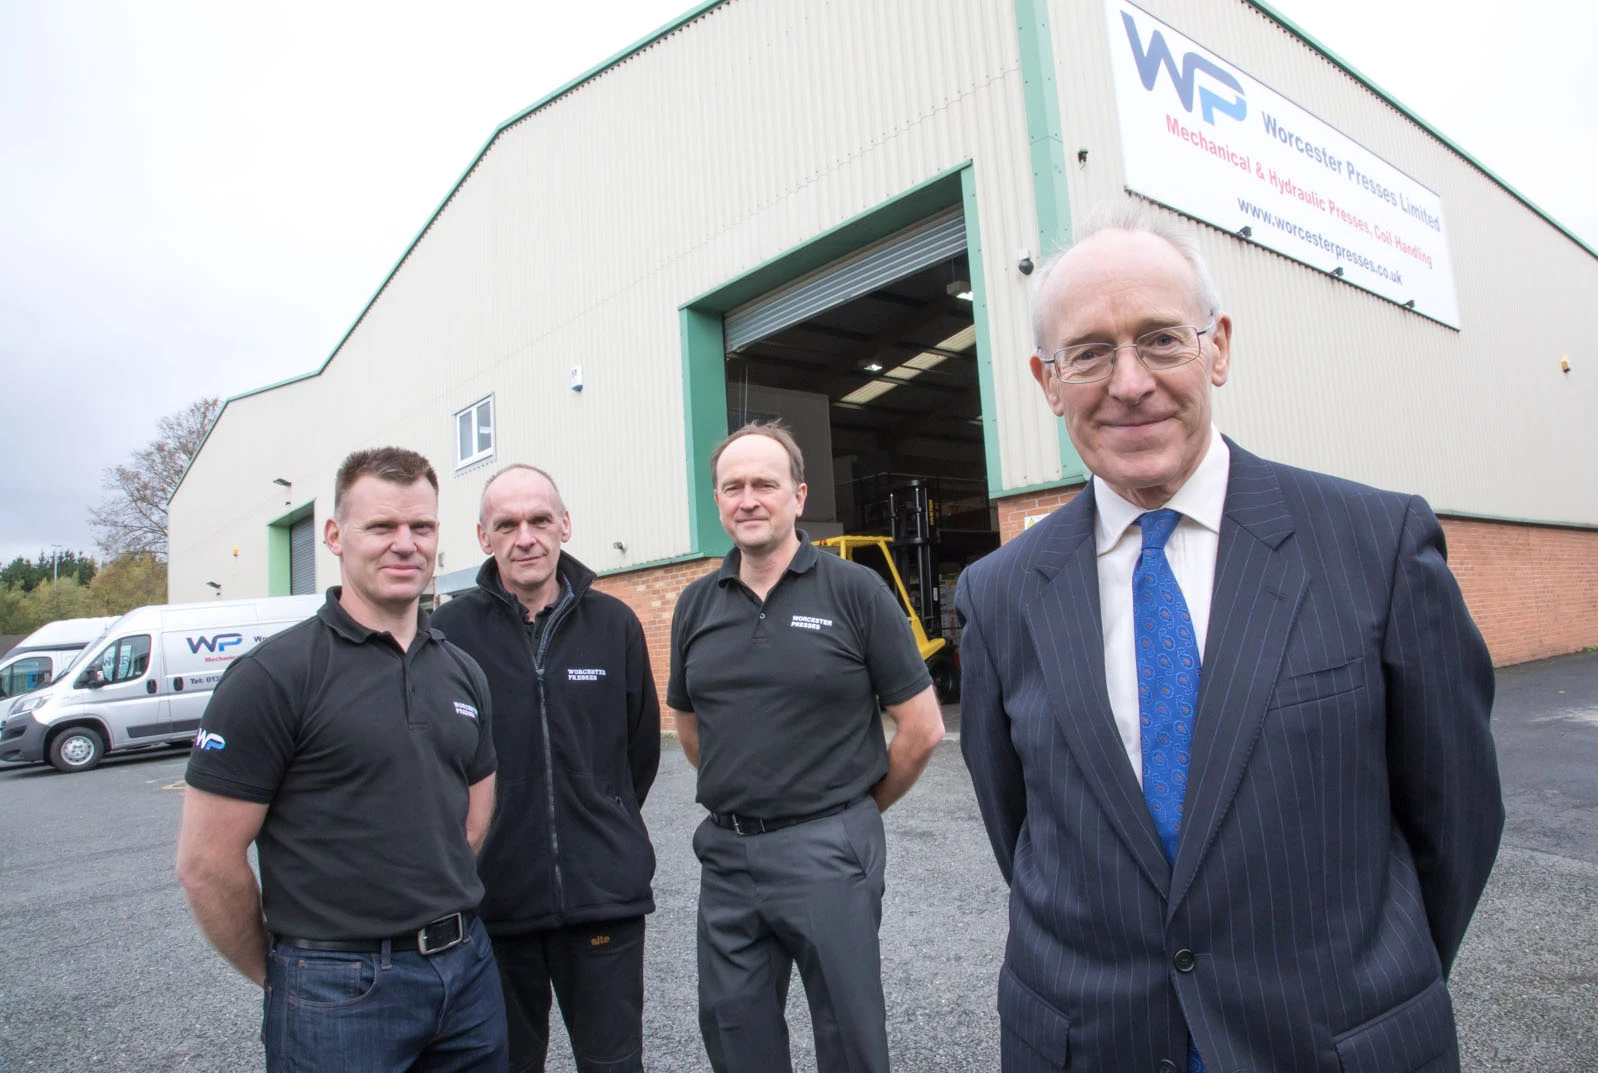 Worcester Presses' new home